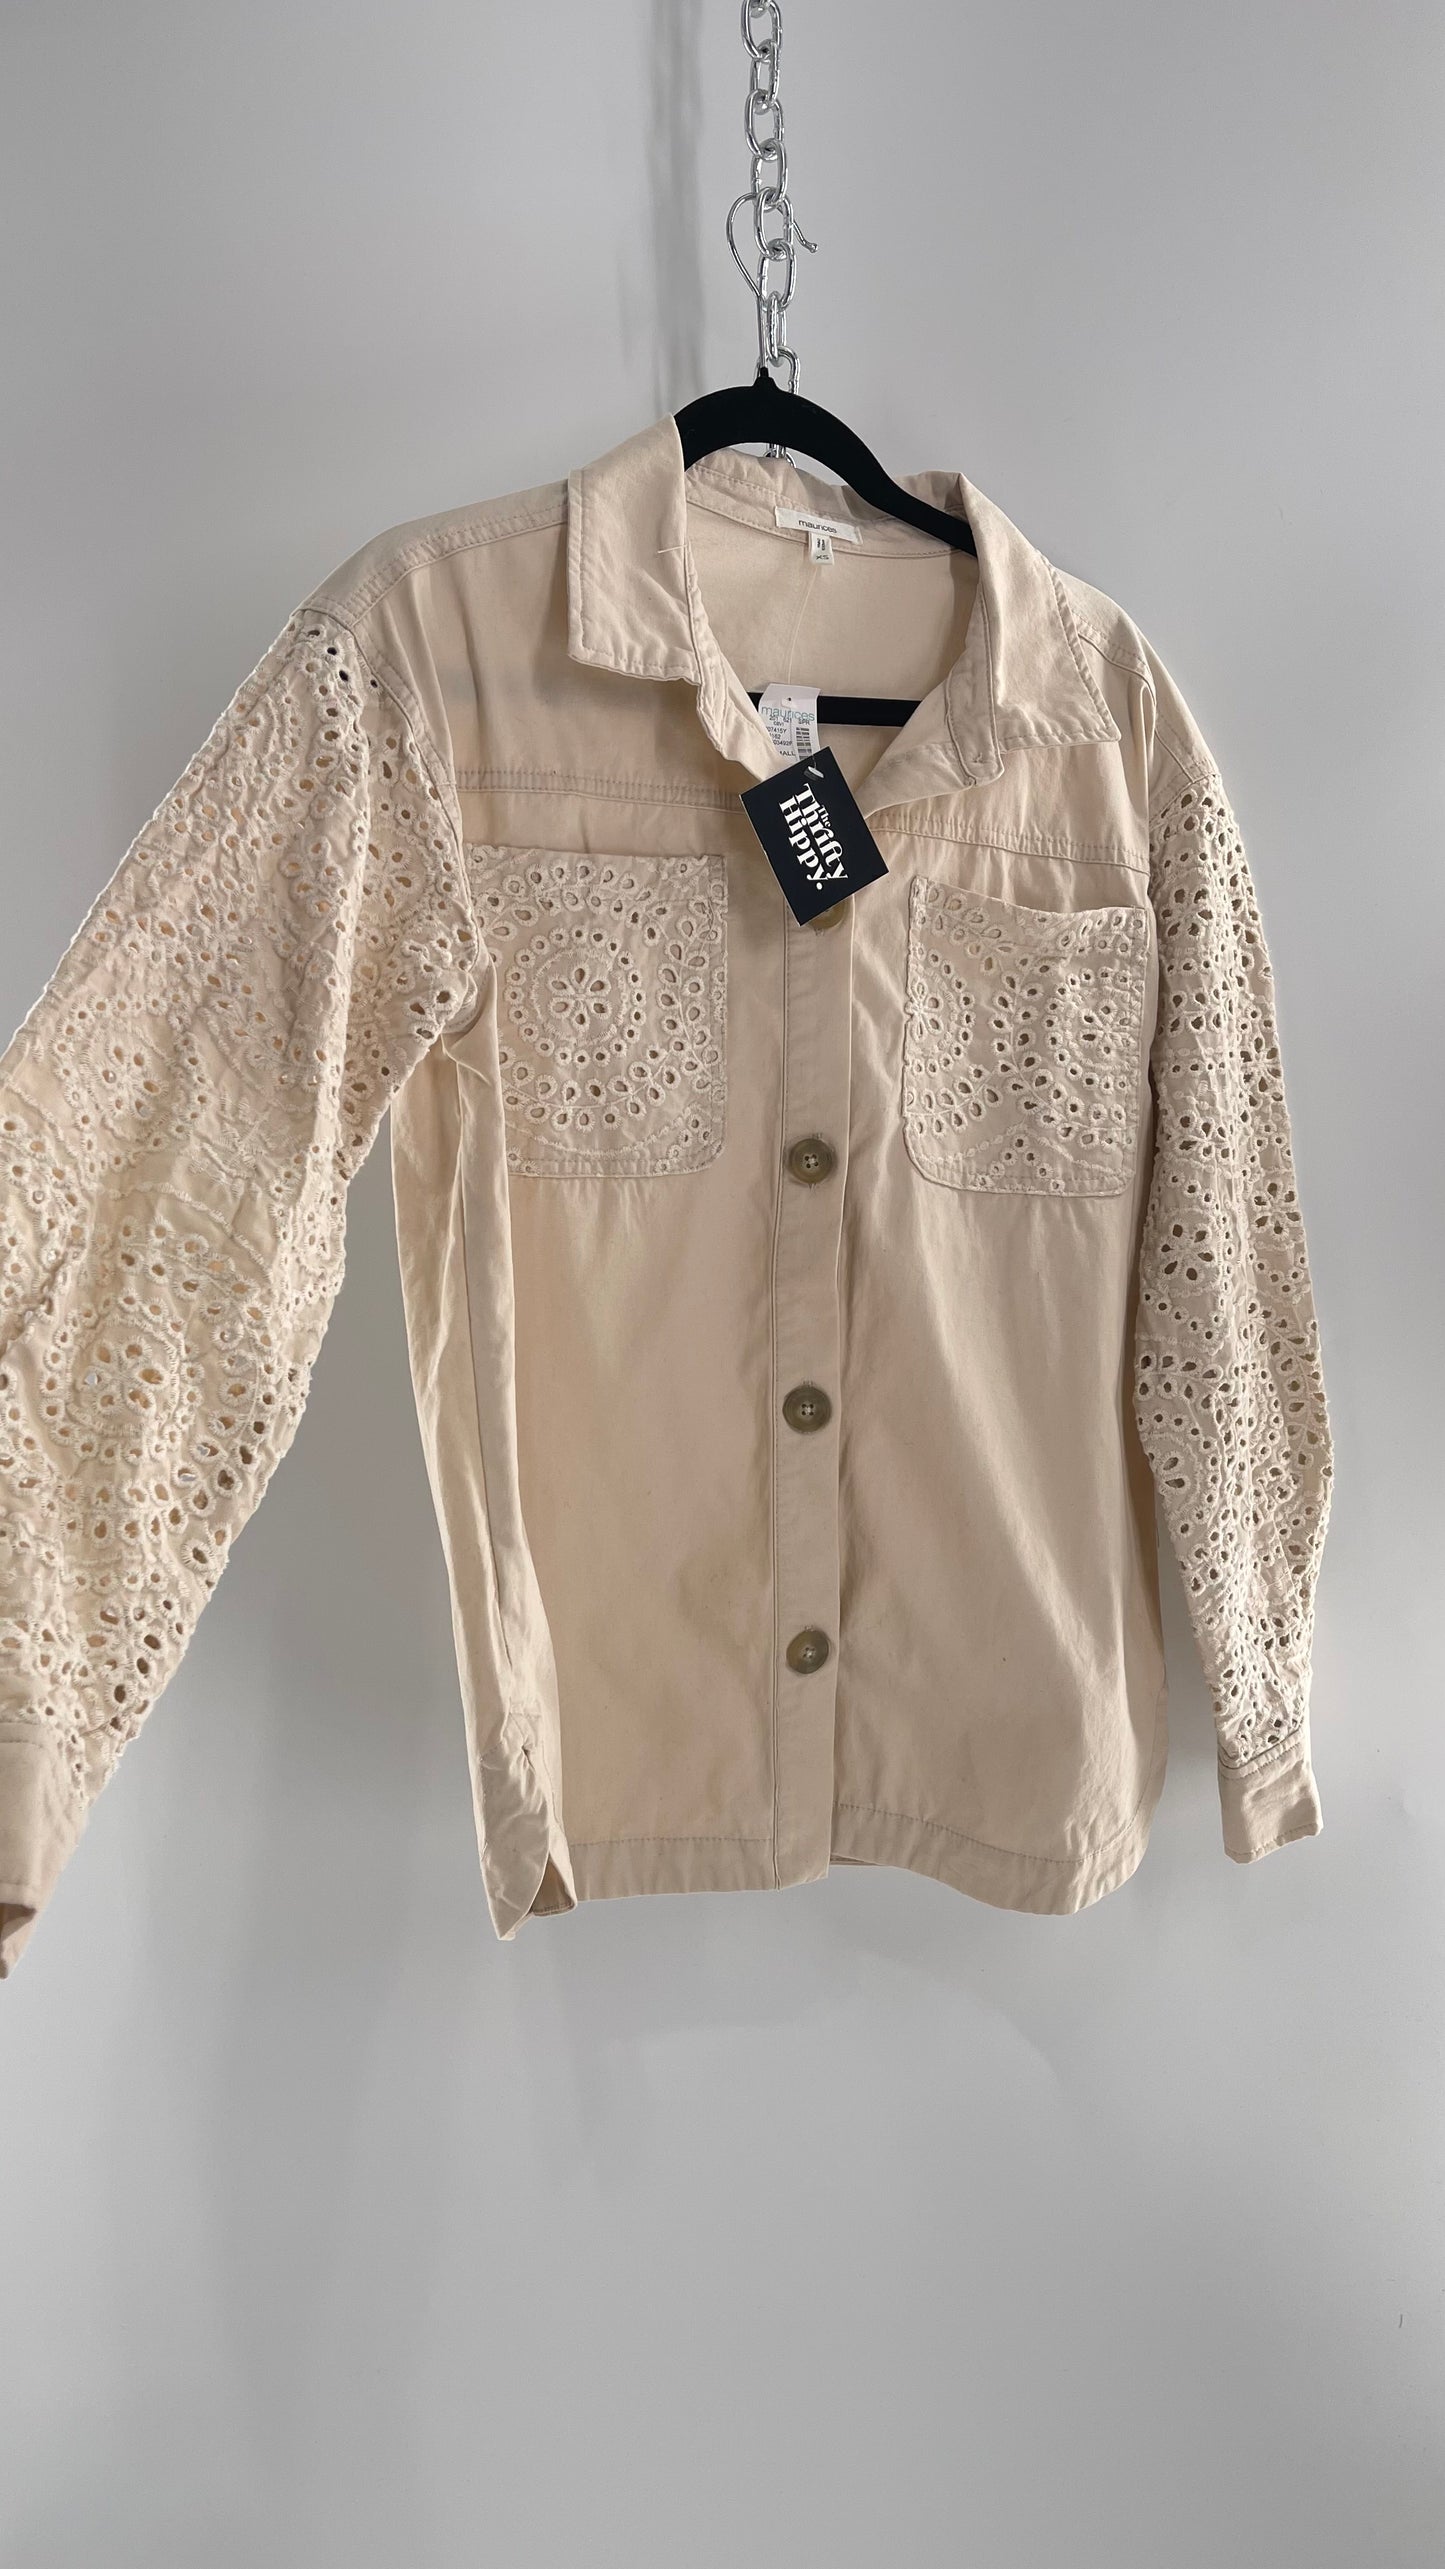 Maurices Anthropologie Beige Cotton Button Up with Eyelet Lace Sleeves and Pockets with Tags Attached  (XS)